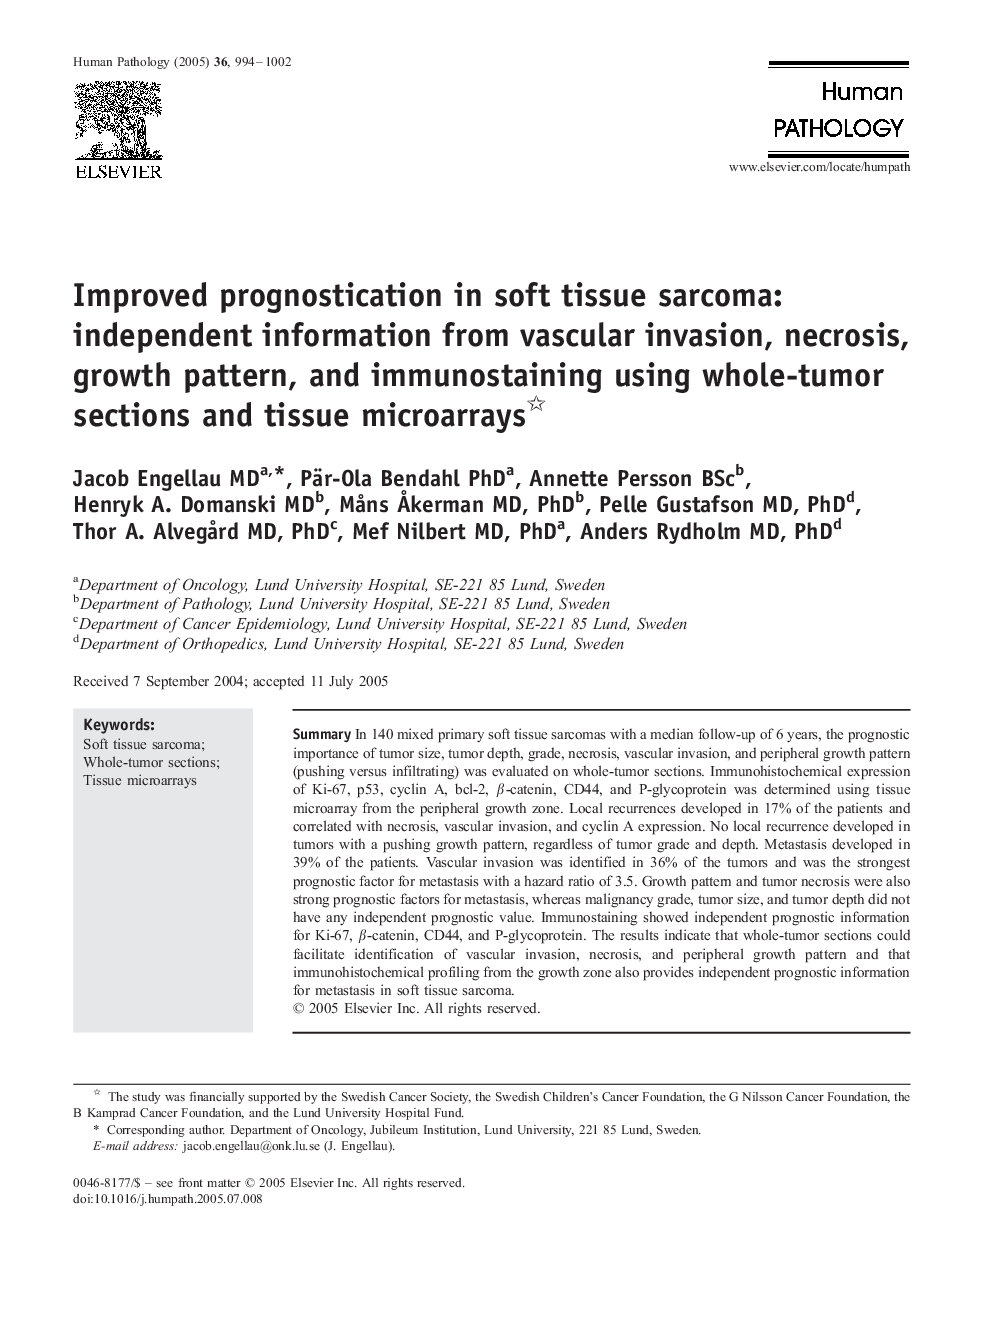 Improved prognostication in soft tissue sarcoma: independent information from vascular invasion, necrosis, growth pattern, and immunostaining using whole-tumor sections and tissue microarrays